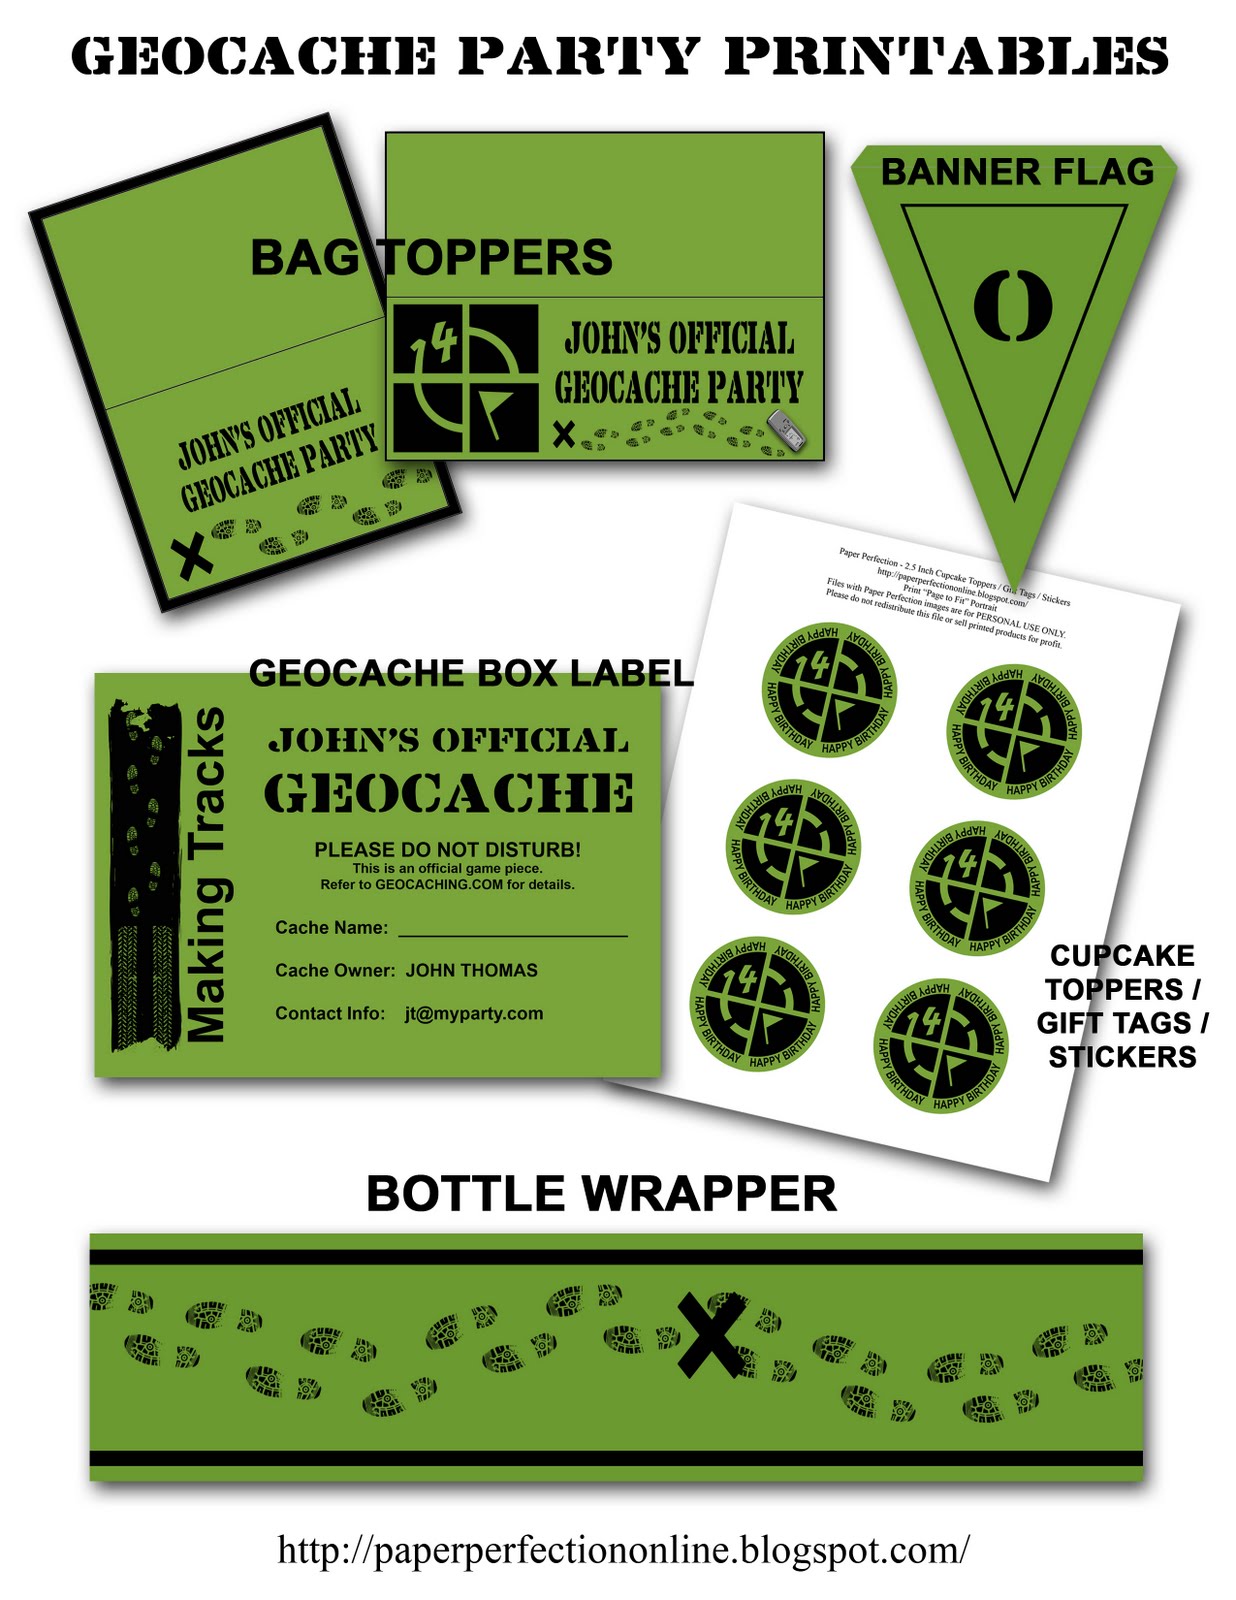 So You Want to Hide a Geocache: A Guide for Prospective Cache